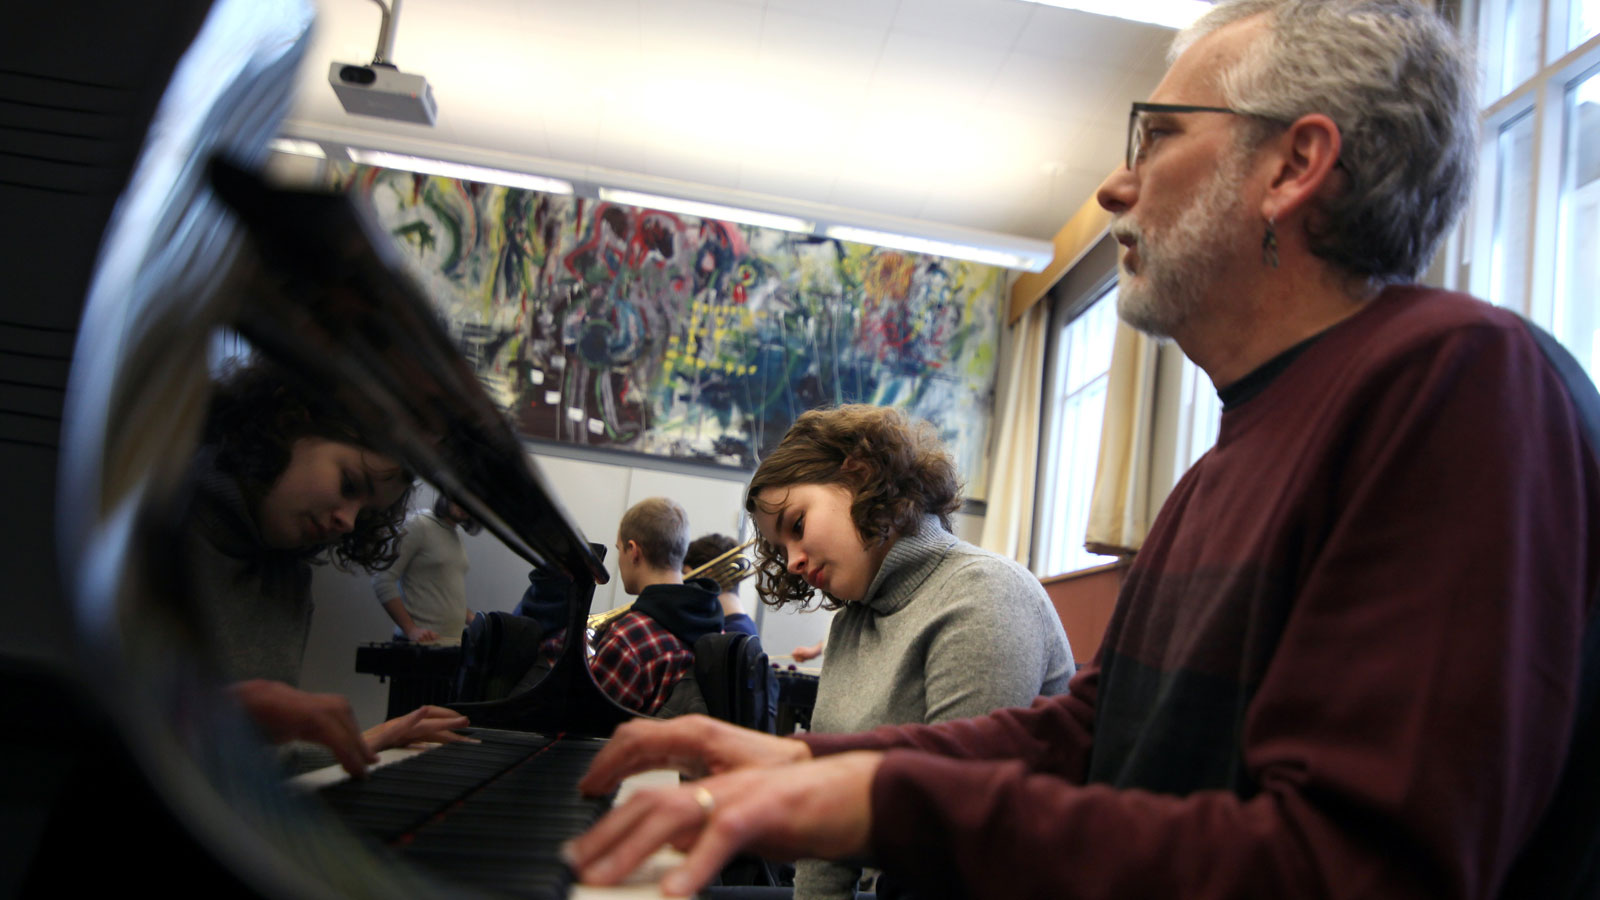 Sonja Klusman plays the piano with Matt Turner, Instructor of Music, during his Applied Musicianship II class